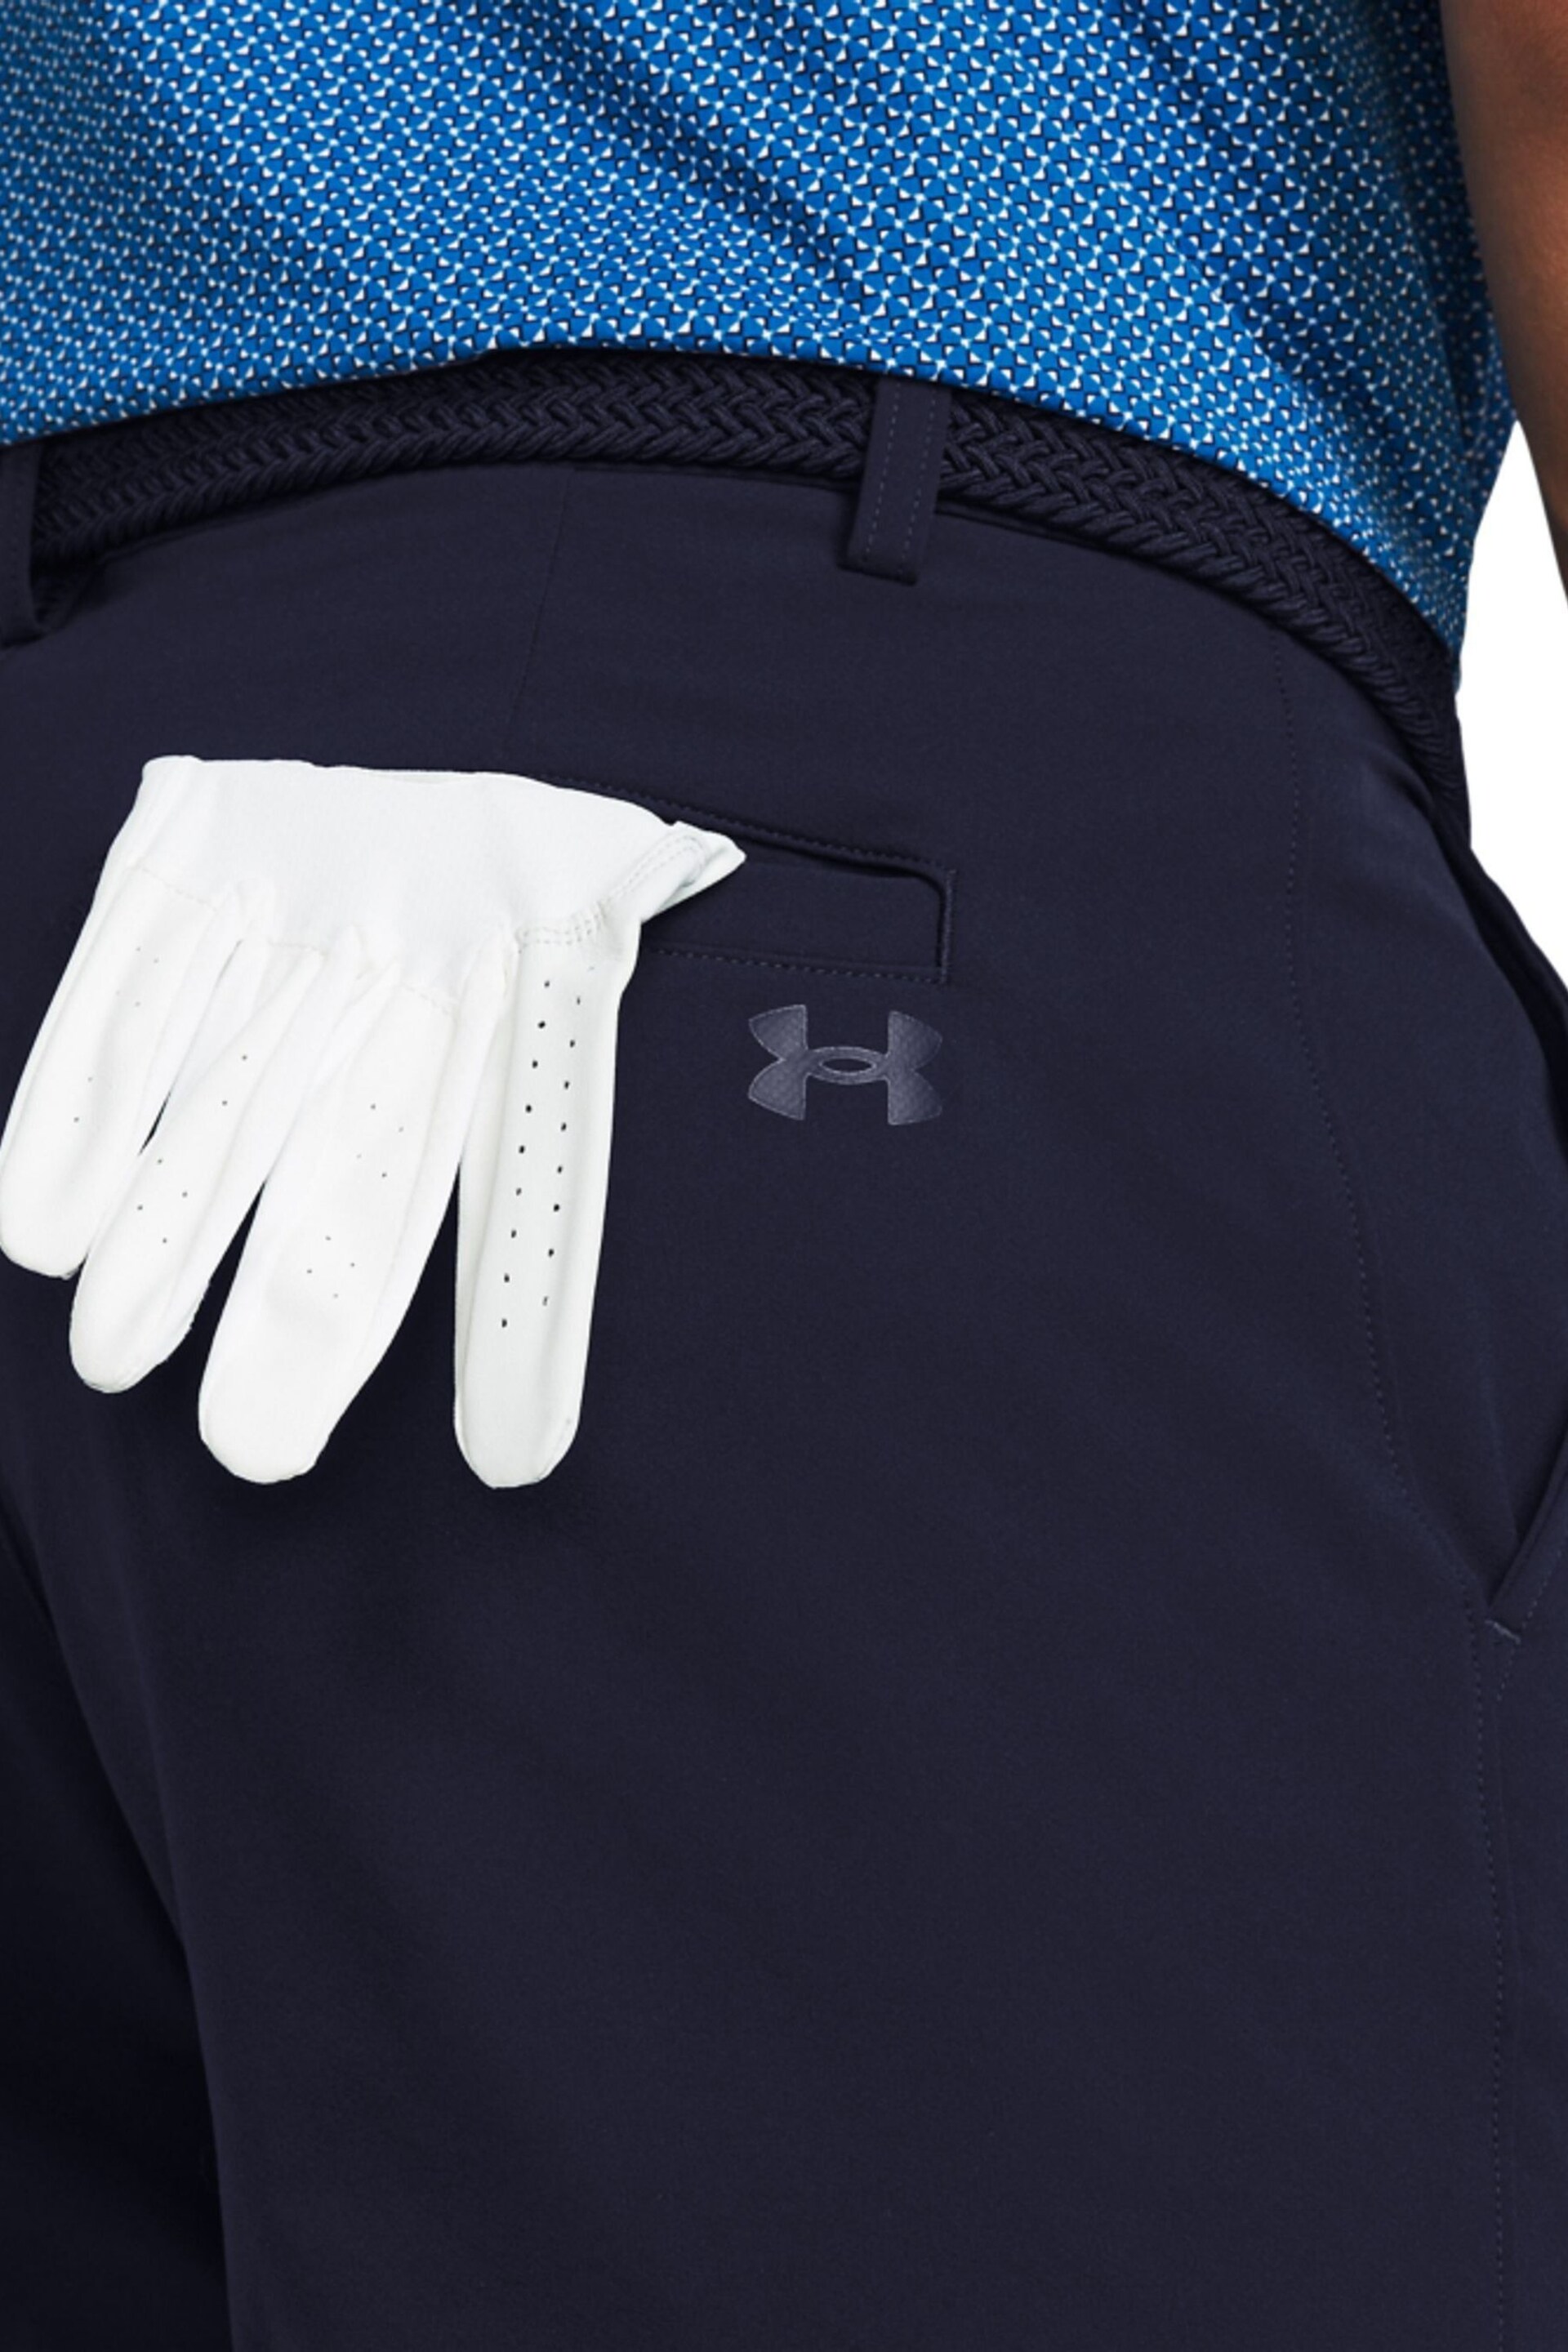 Under Armour Navy Golf Tech Taper Shorts - Image 4 of 5